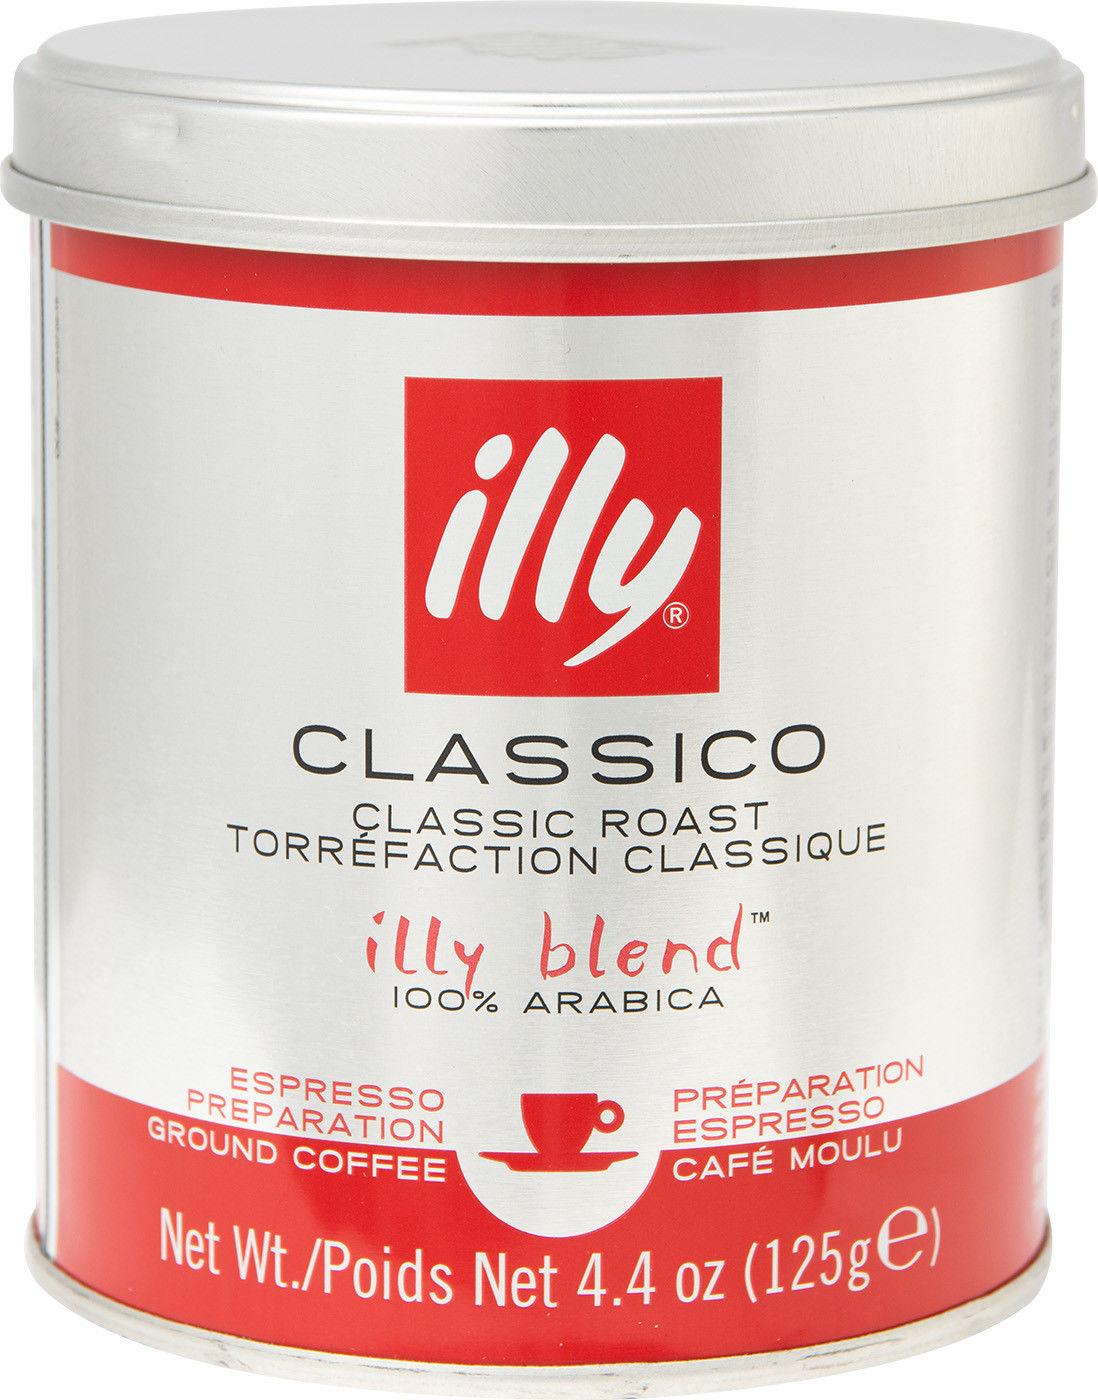 Illy classic